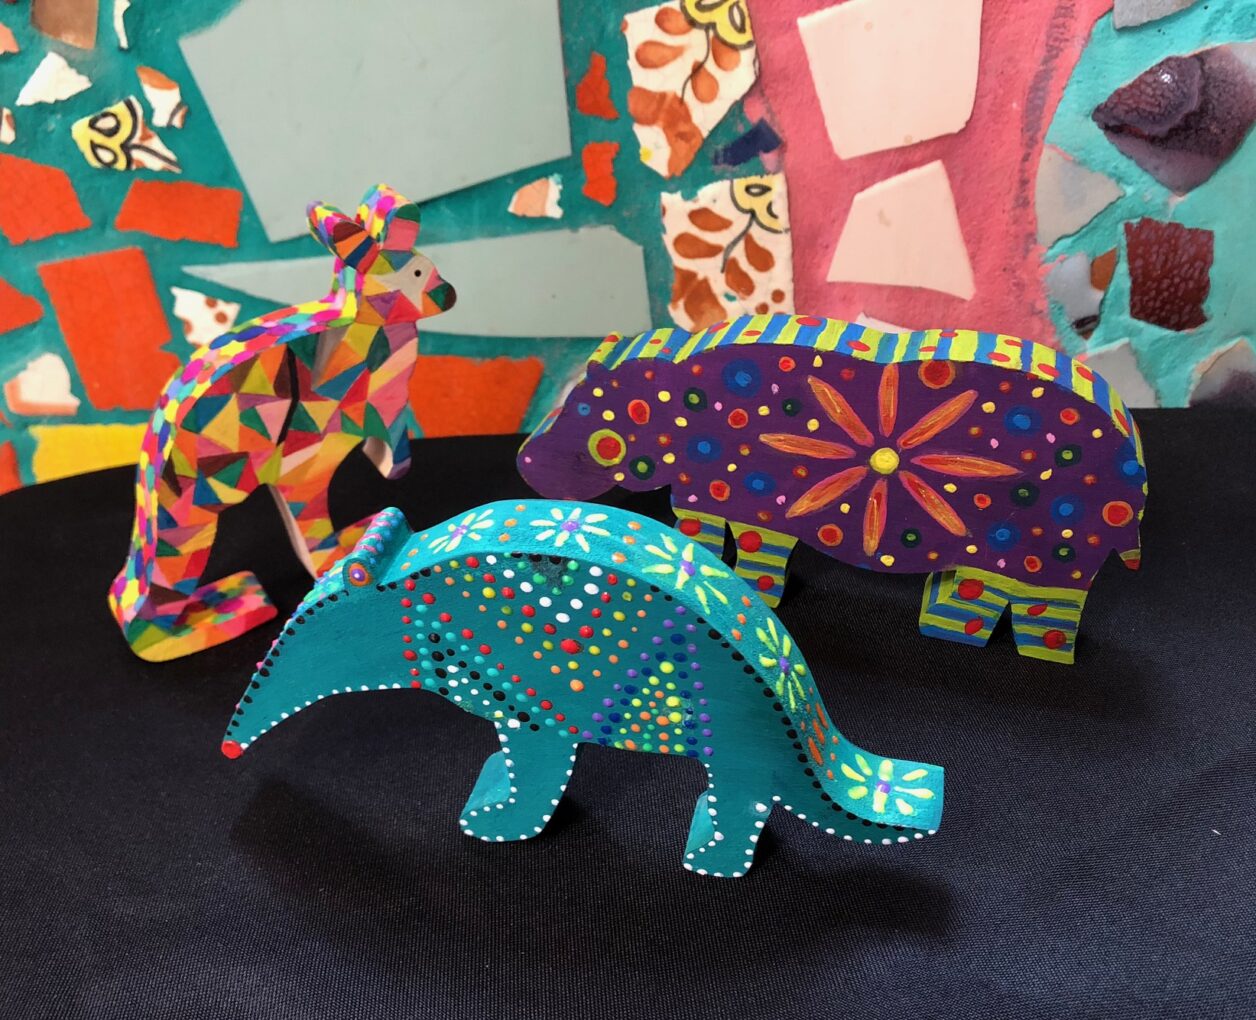 Three small wooden animals - a kangaroo, an aardvark, and a hippo - are adorned with bright colors and patterns